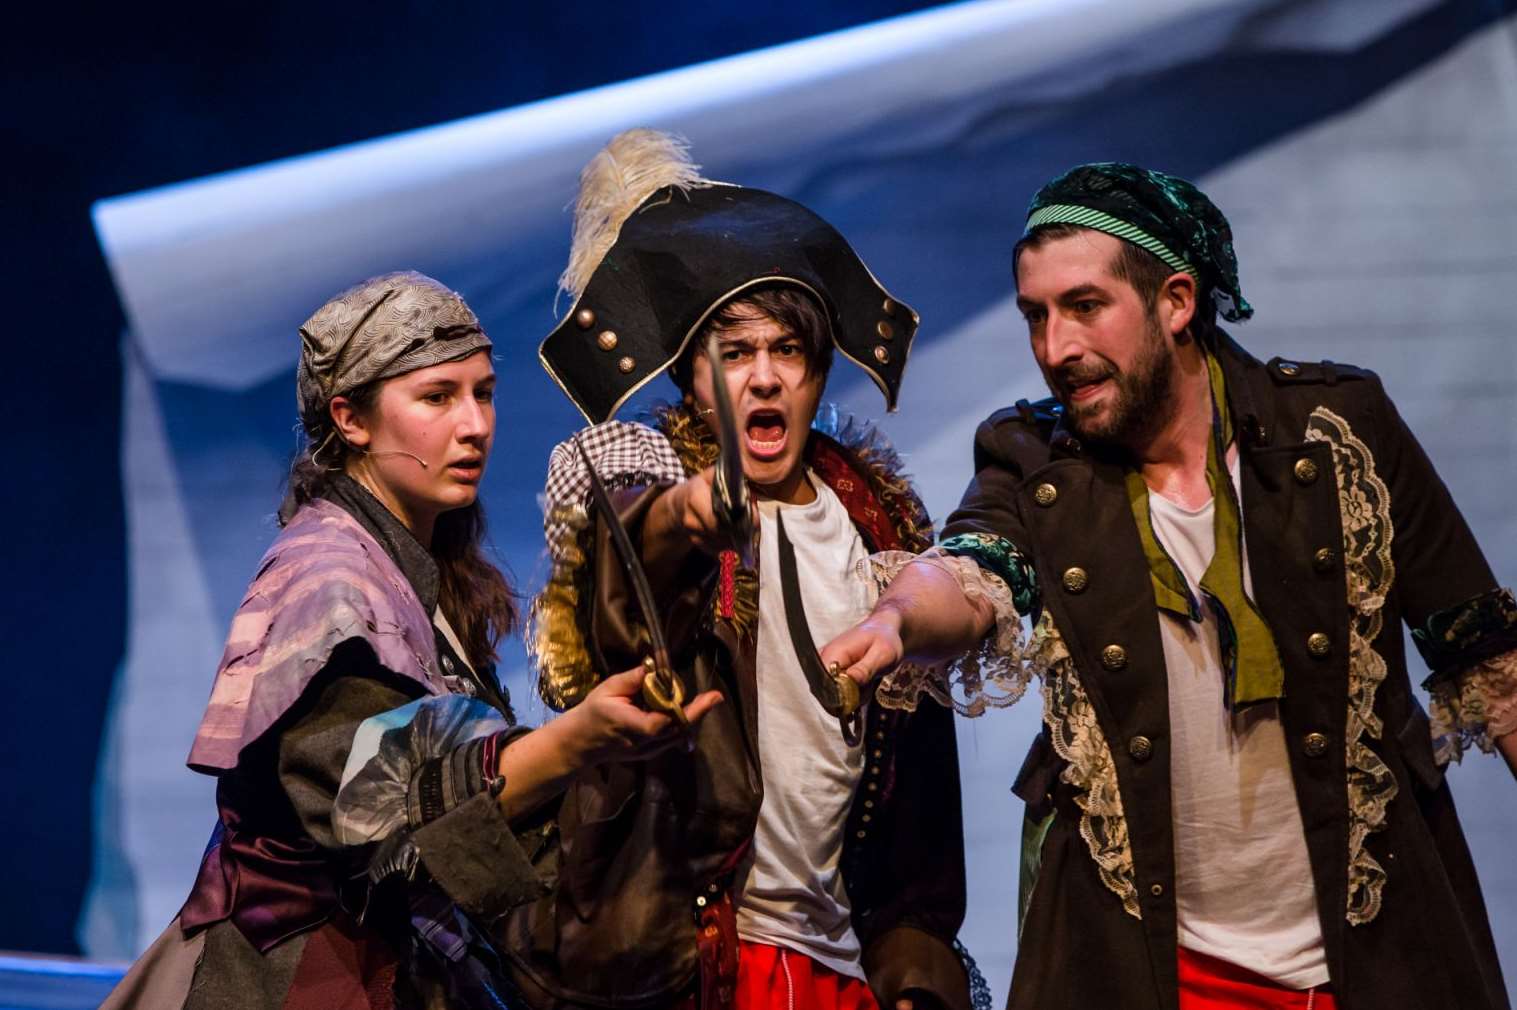 Flinn and his friends plan to escape from the pirate dinosaurs. Pic: Les Petits Theatre